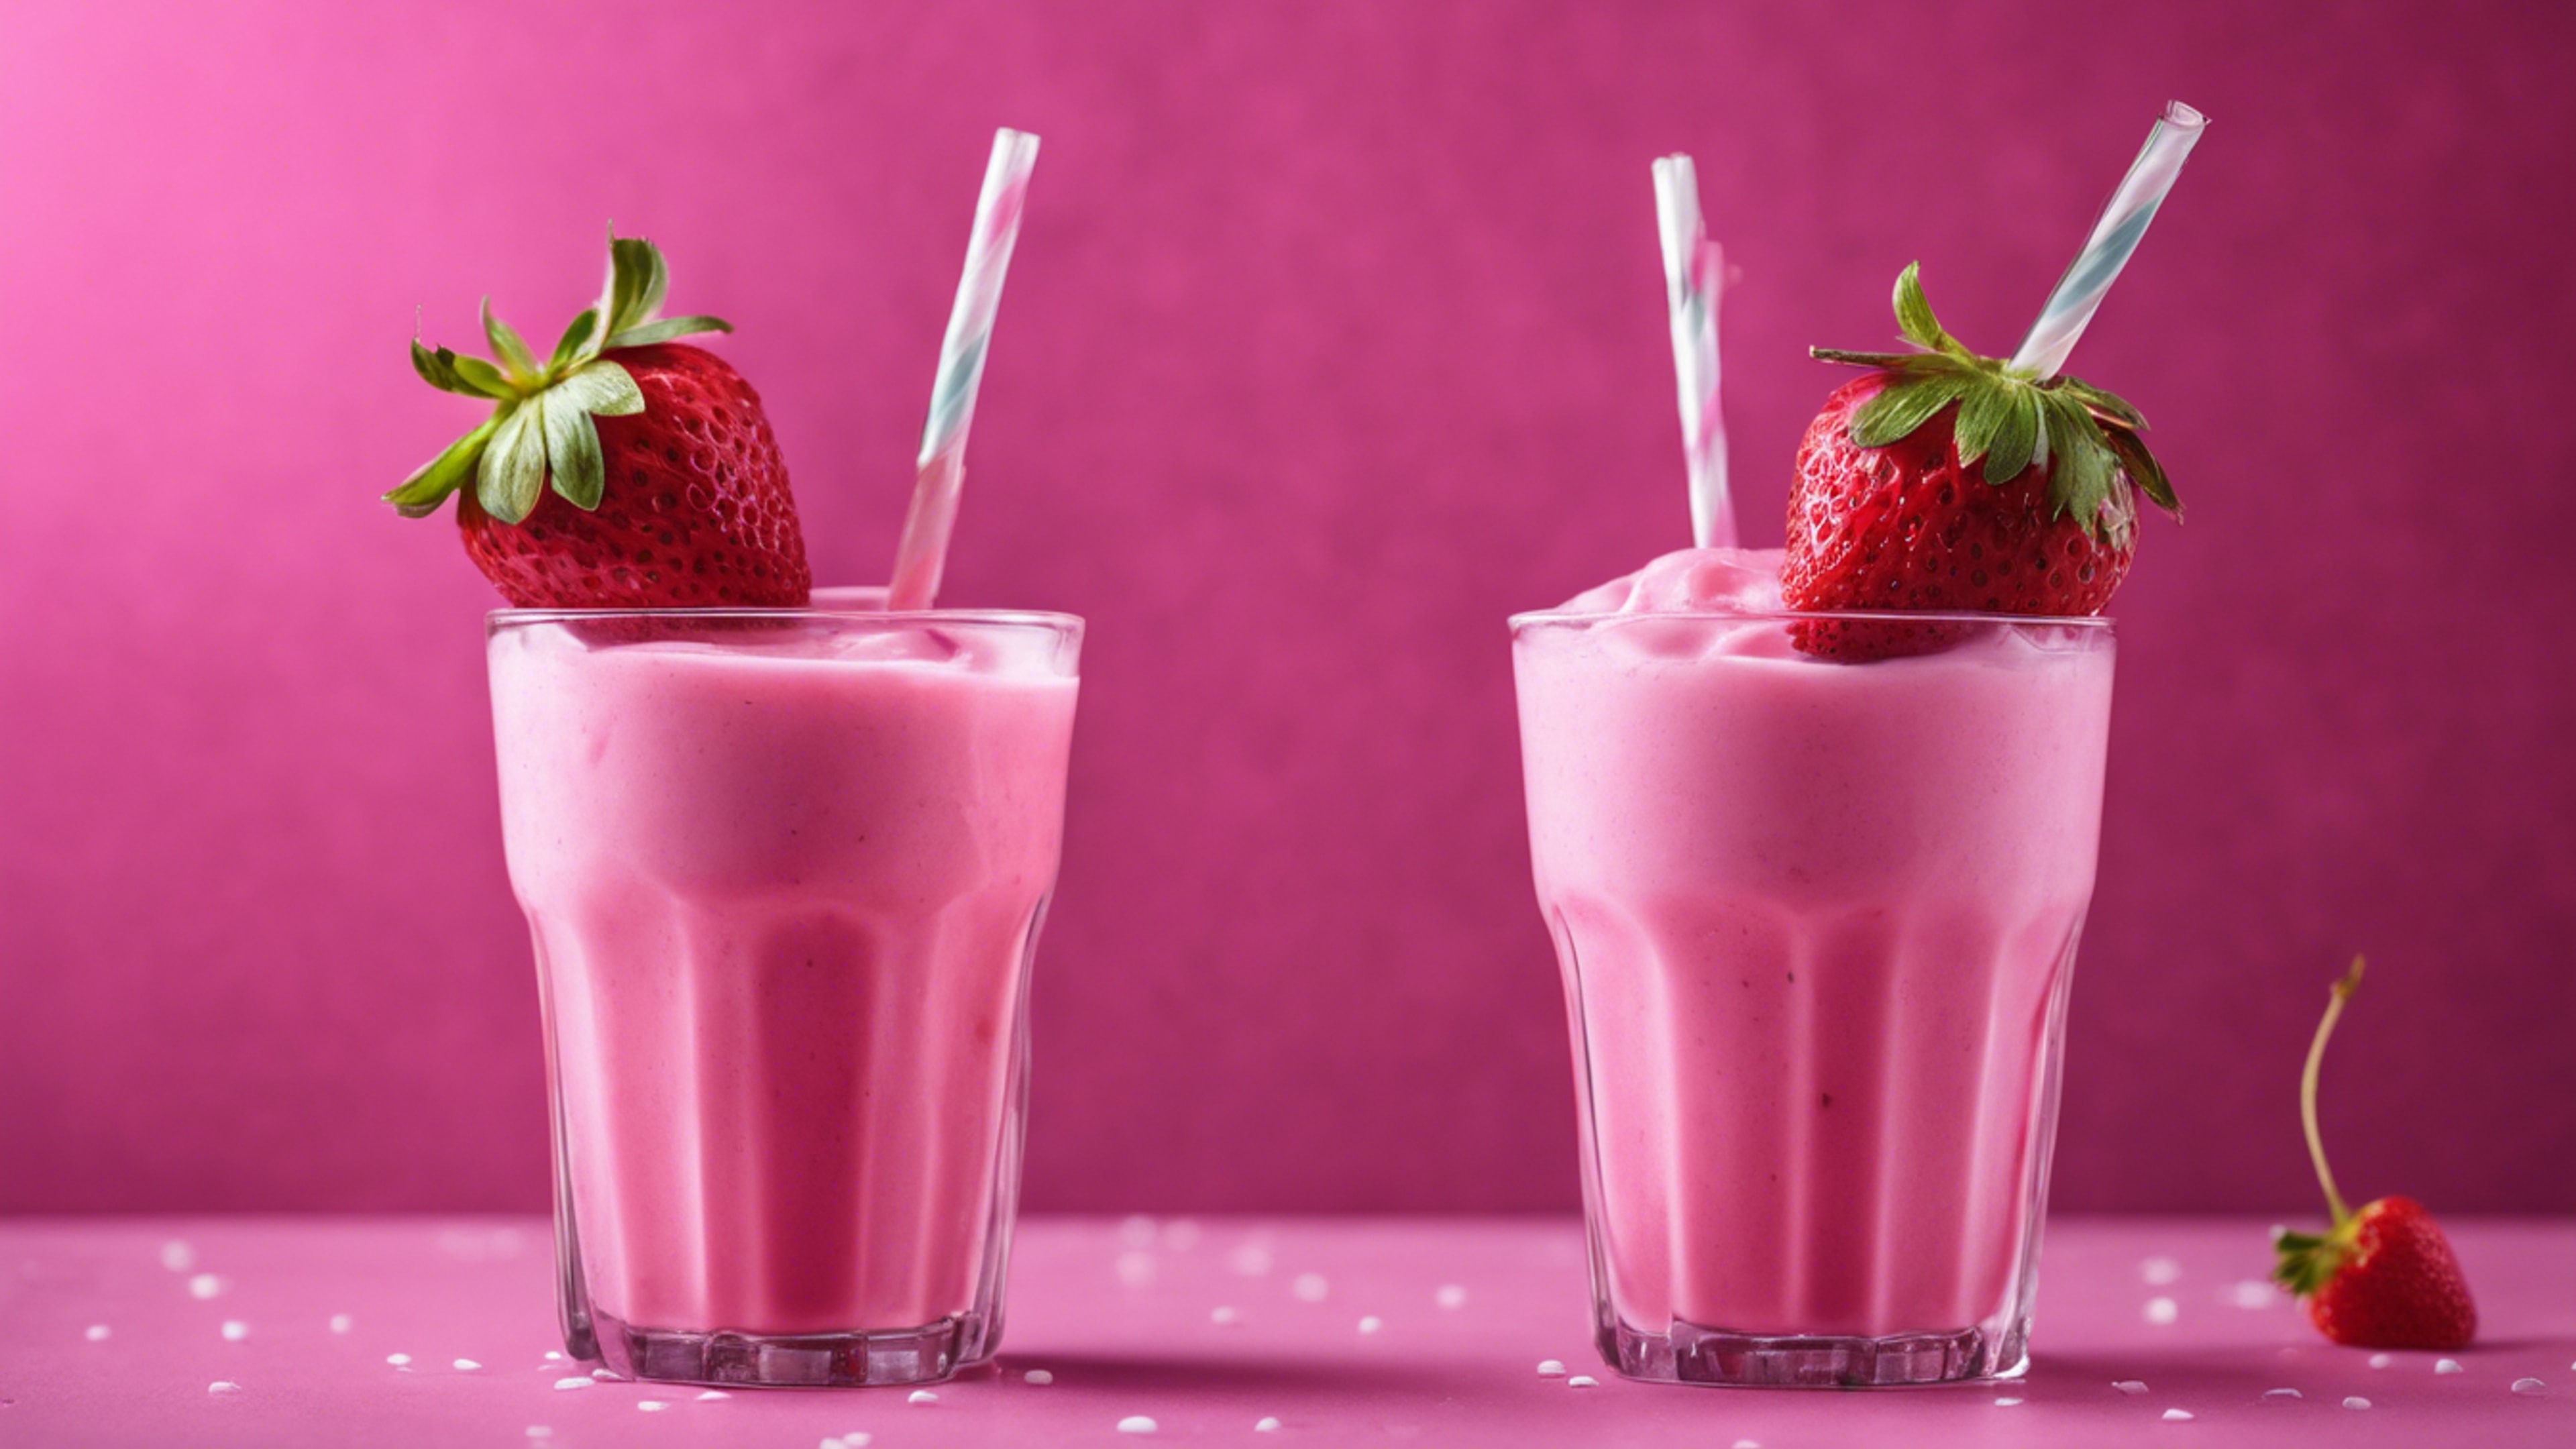 Two glasses filled with bright pink strawberry milkshake garnished with straws and cherries. ផ្ទាំង​រូបភាព[367e513037cf4f879d8a]